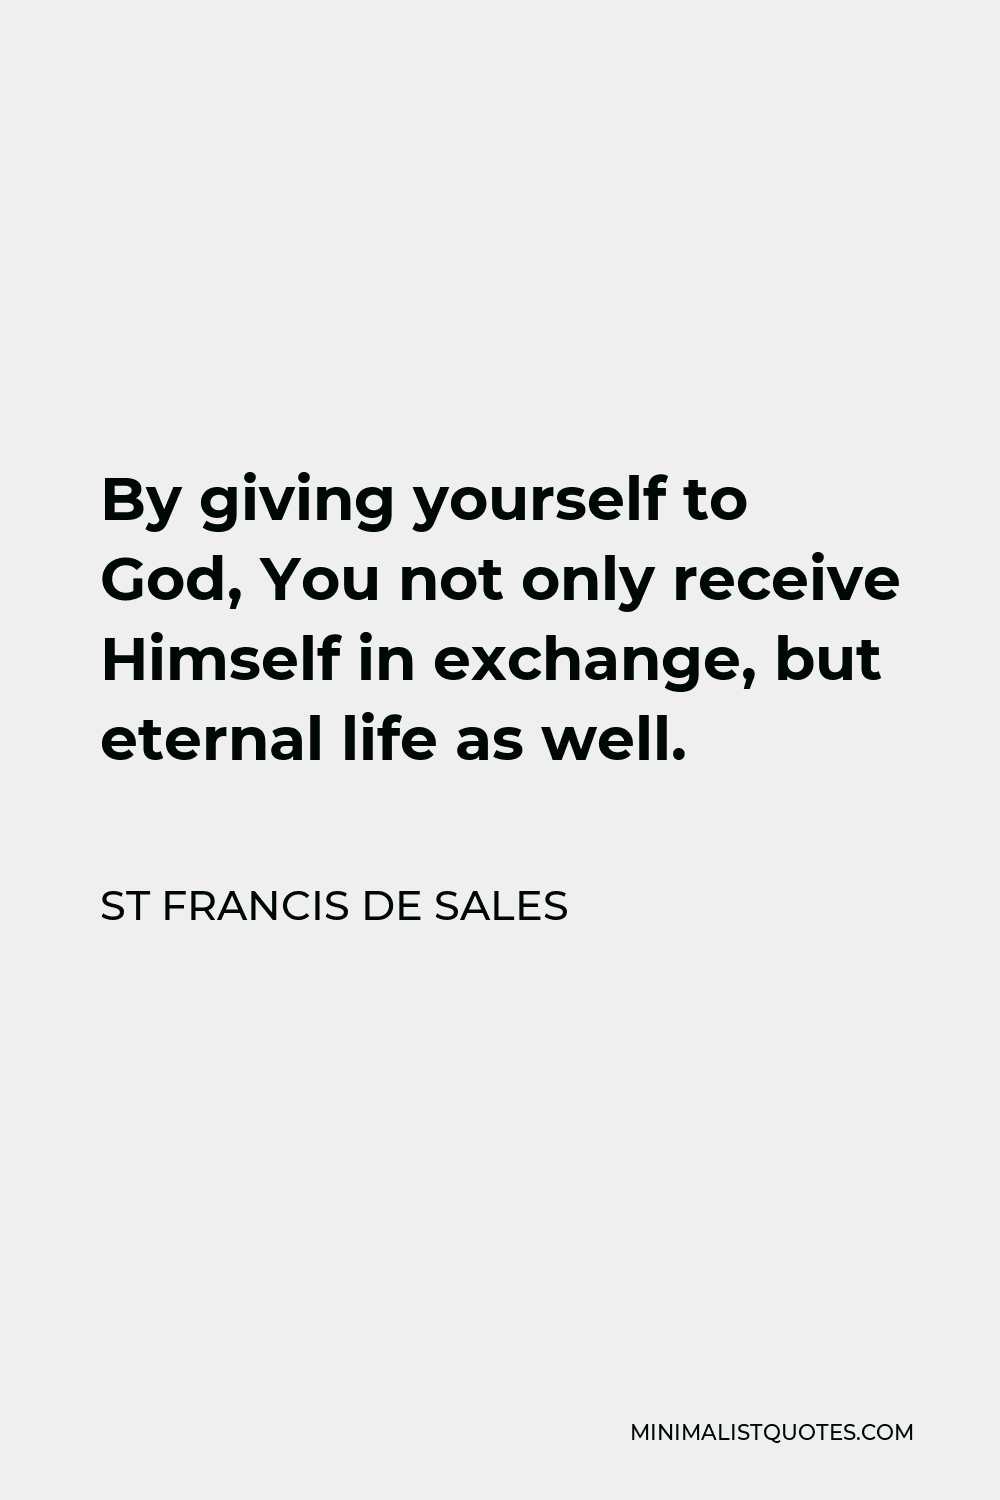 St Francis De Sales Quote - By giving yourself to God, You not only receive Himself in exchange, but eternal life as well.